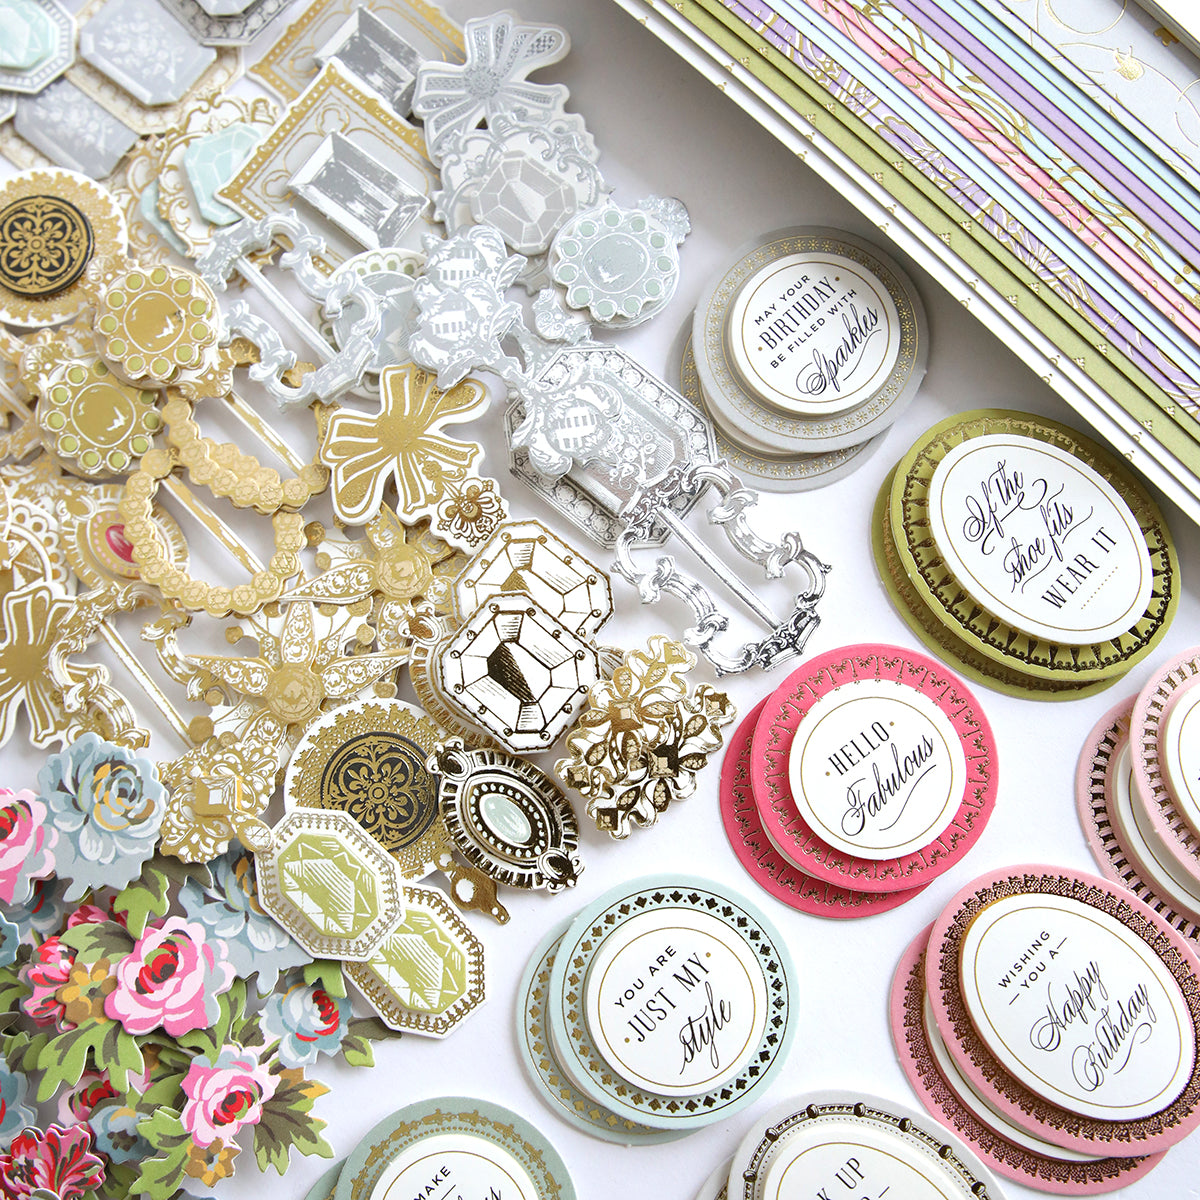 A variety of Paper Shoes Finishing School Refill Kit cardstock and embellishments are laid out on a table.